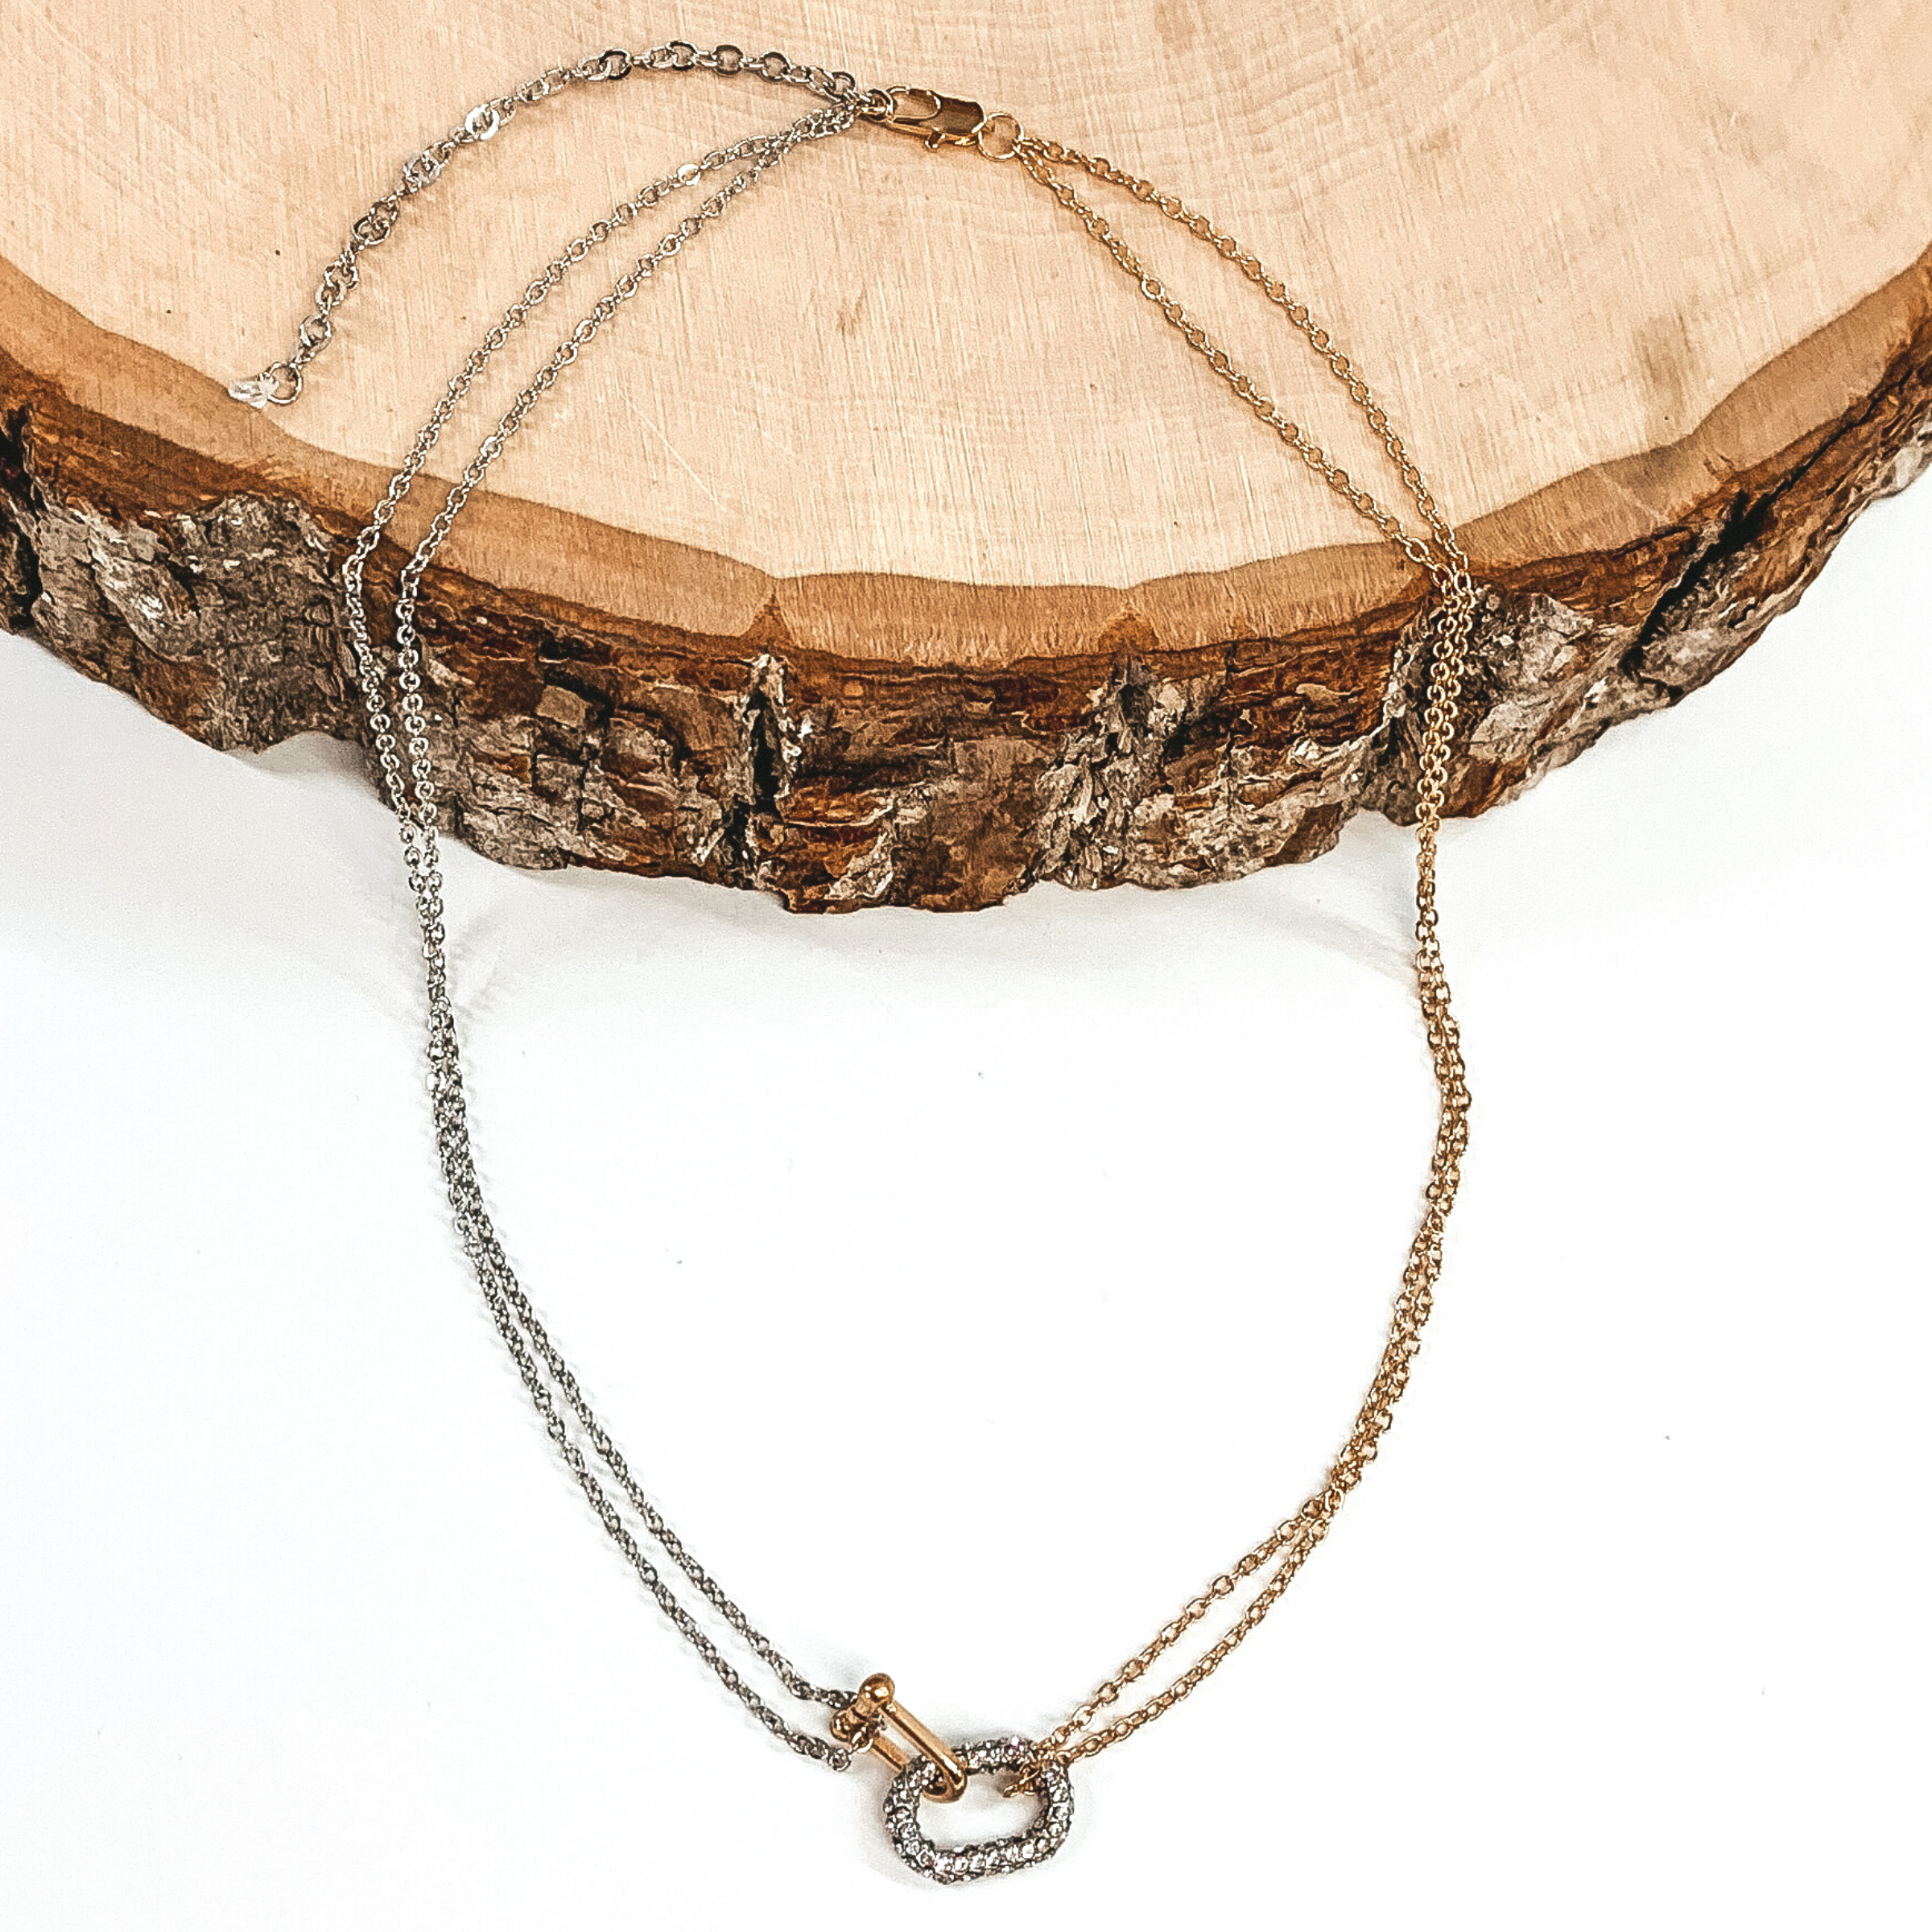 This is a thin, double chained necklace. It is half gold and half silver with a crystal, silver oval pendant and a gold horse shoe pendant. This necklace is pictures on a white background, laying half on a piece of wood. 